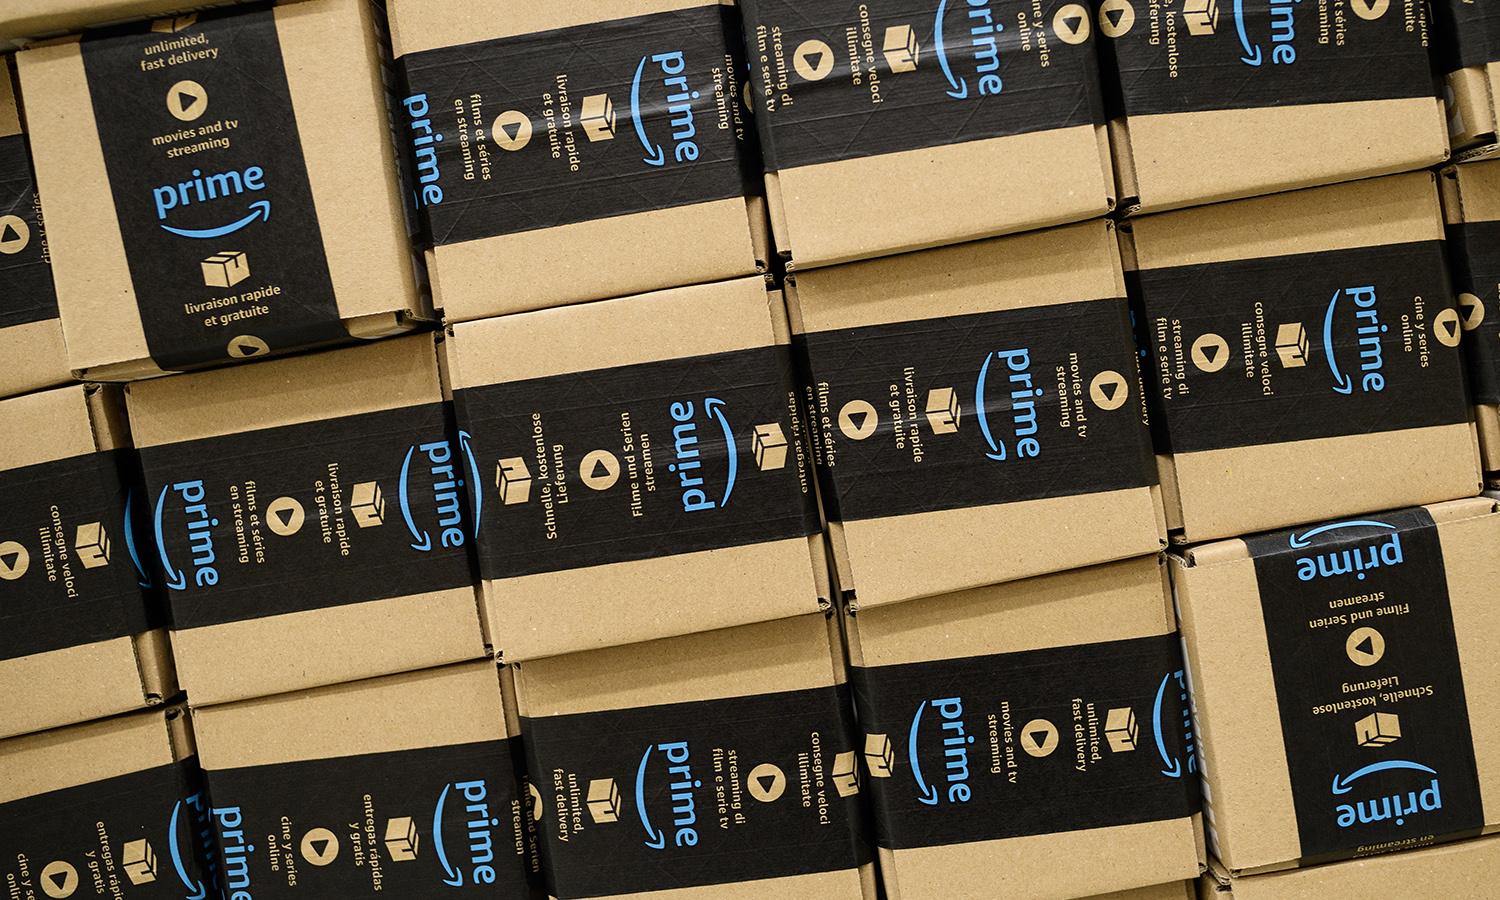 Cybersecurity researchers warned security teams that hackers are using Amazon&#8217;s popular Prime Day to phish for credentials. Pictured: Amazon Prime items are seen in the Amazon fulfillment center on Nov. 15, 2017, in Peterborough, England. (Photo by Leon Neal/Getty Images)